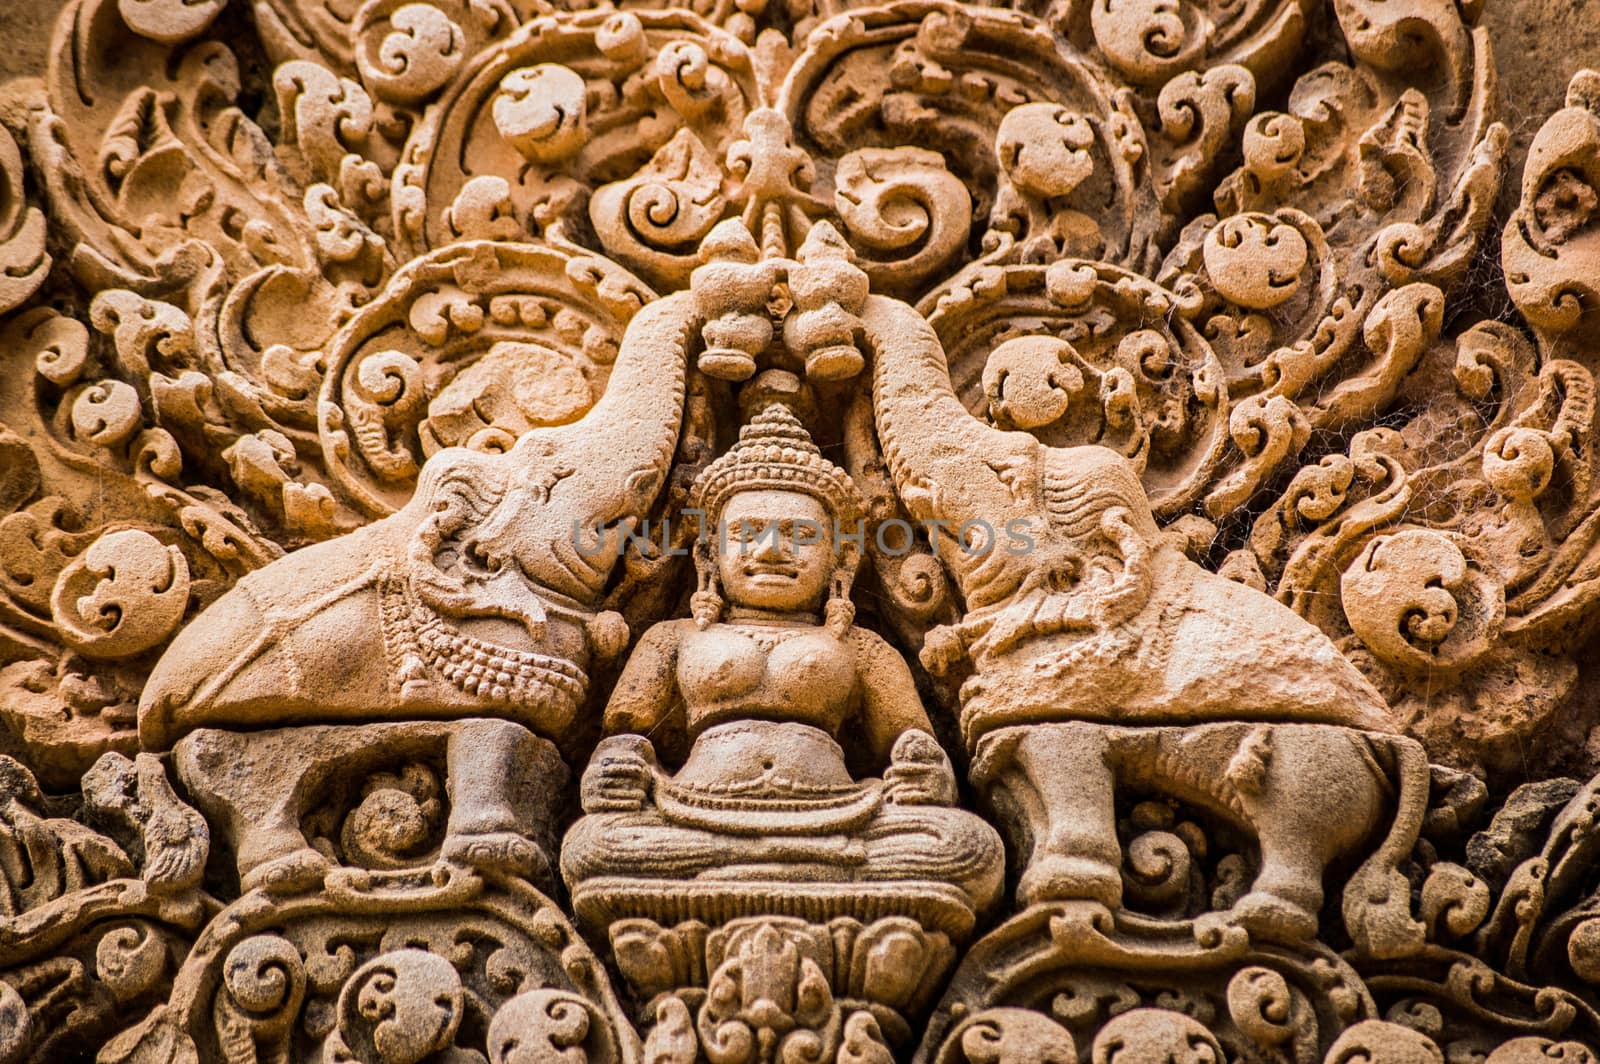 Indra carving, Banteay Srei, Angkor by BasPhoto